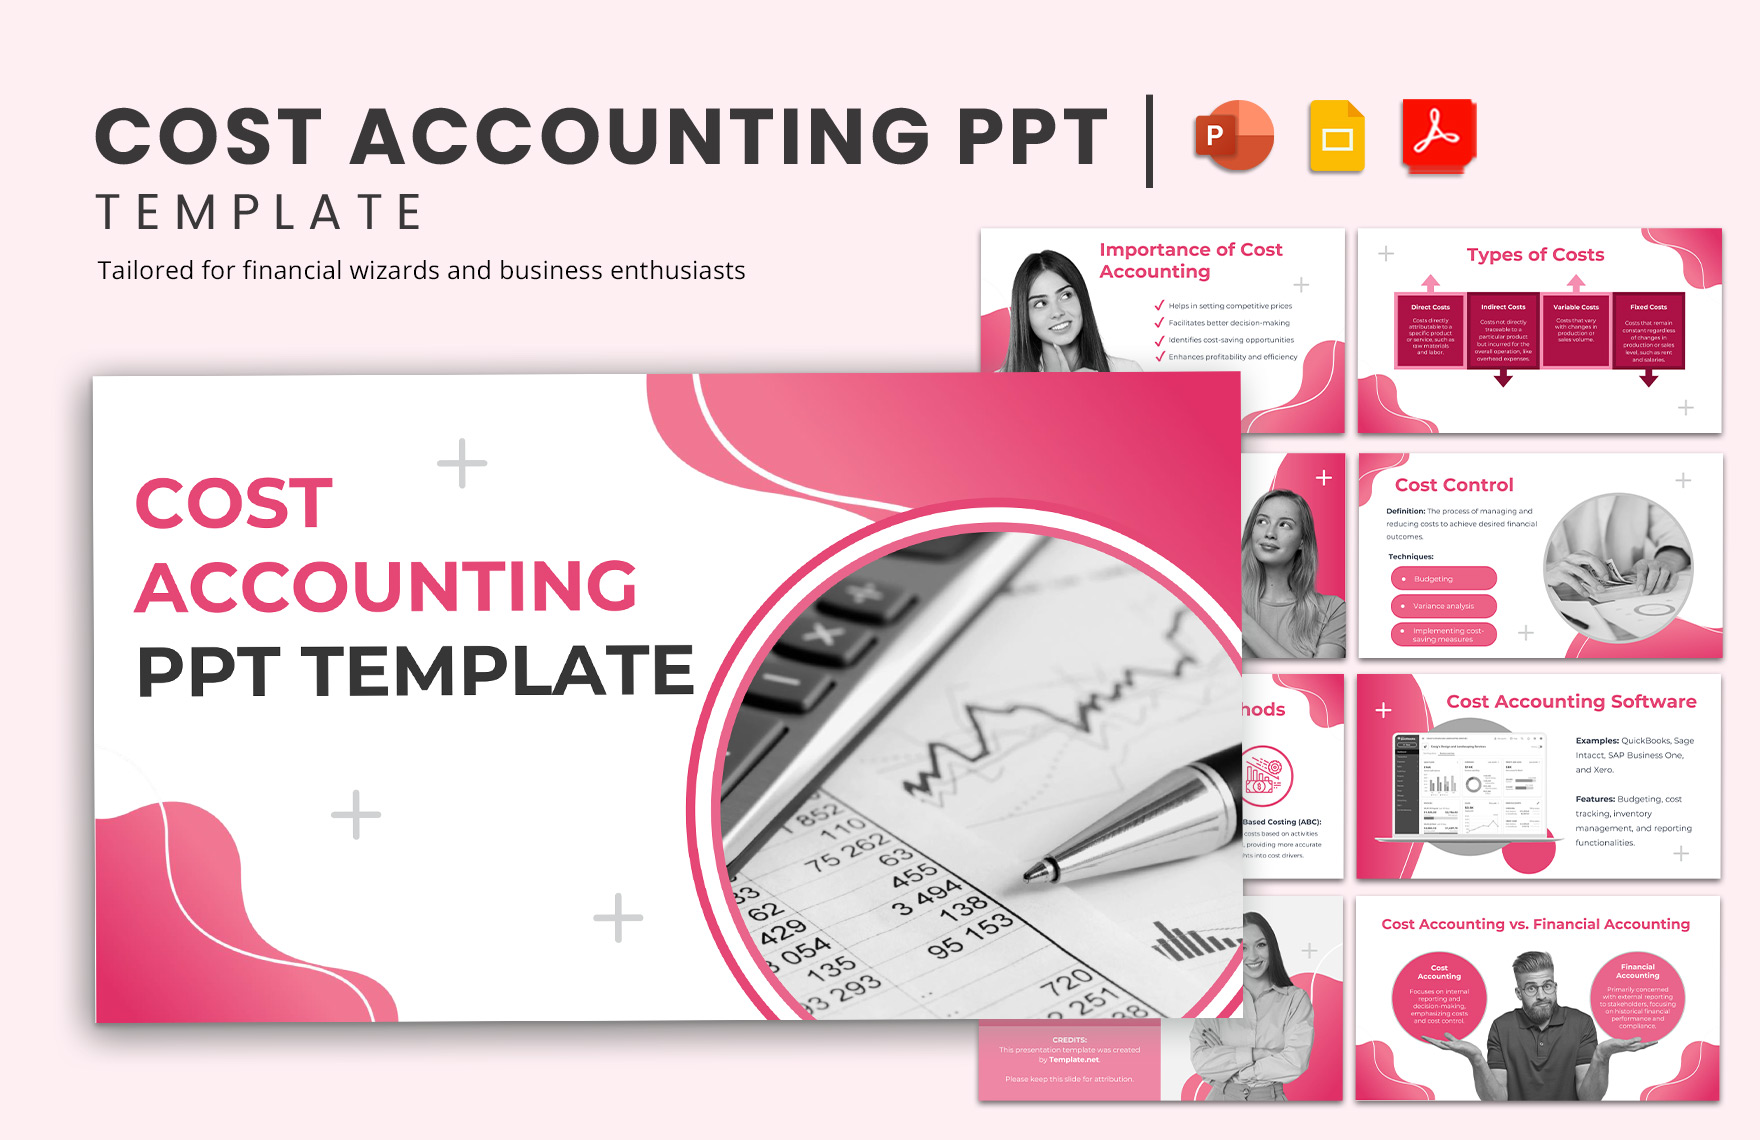 Cost Accounting PPT Template in PDF, PowerPoint, Google Slides